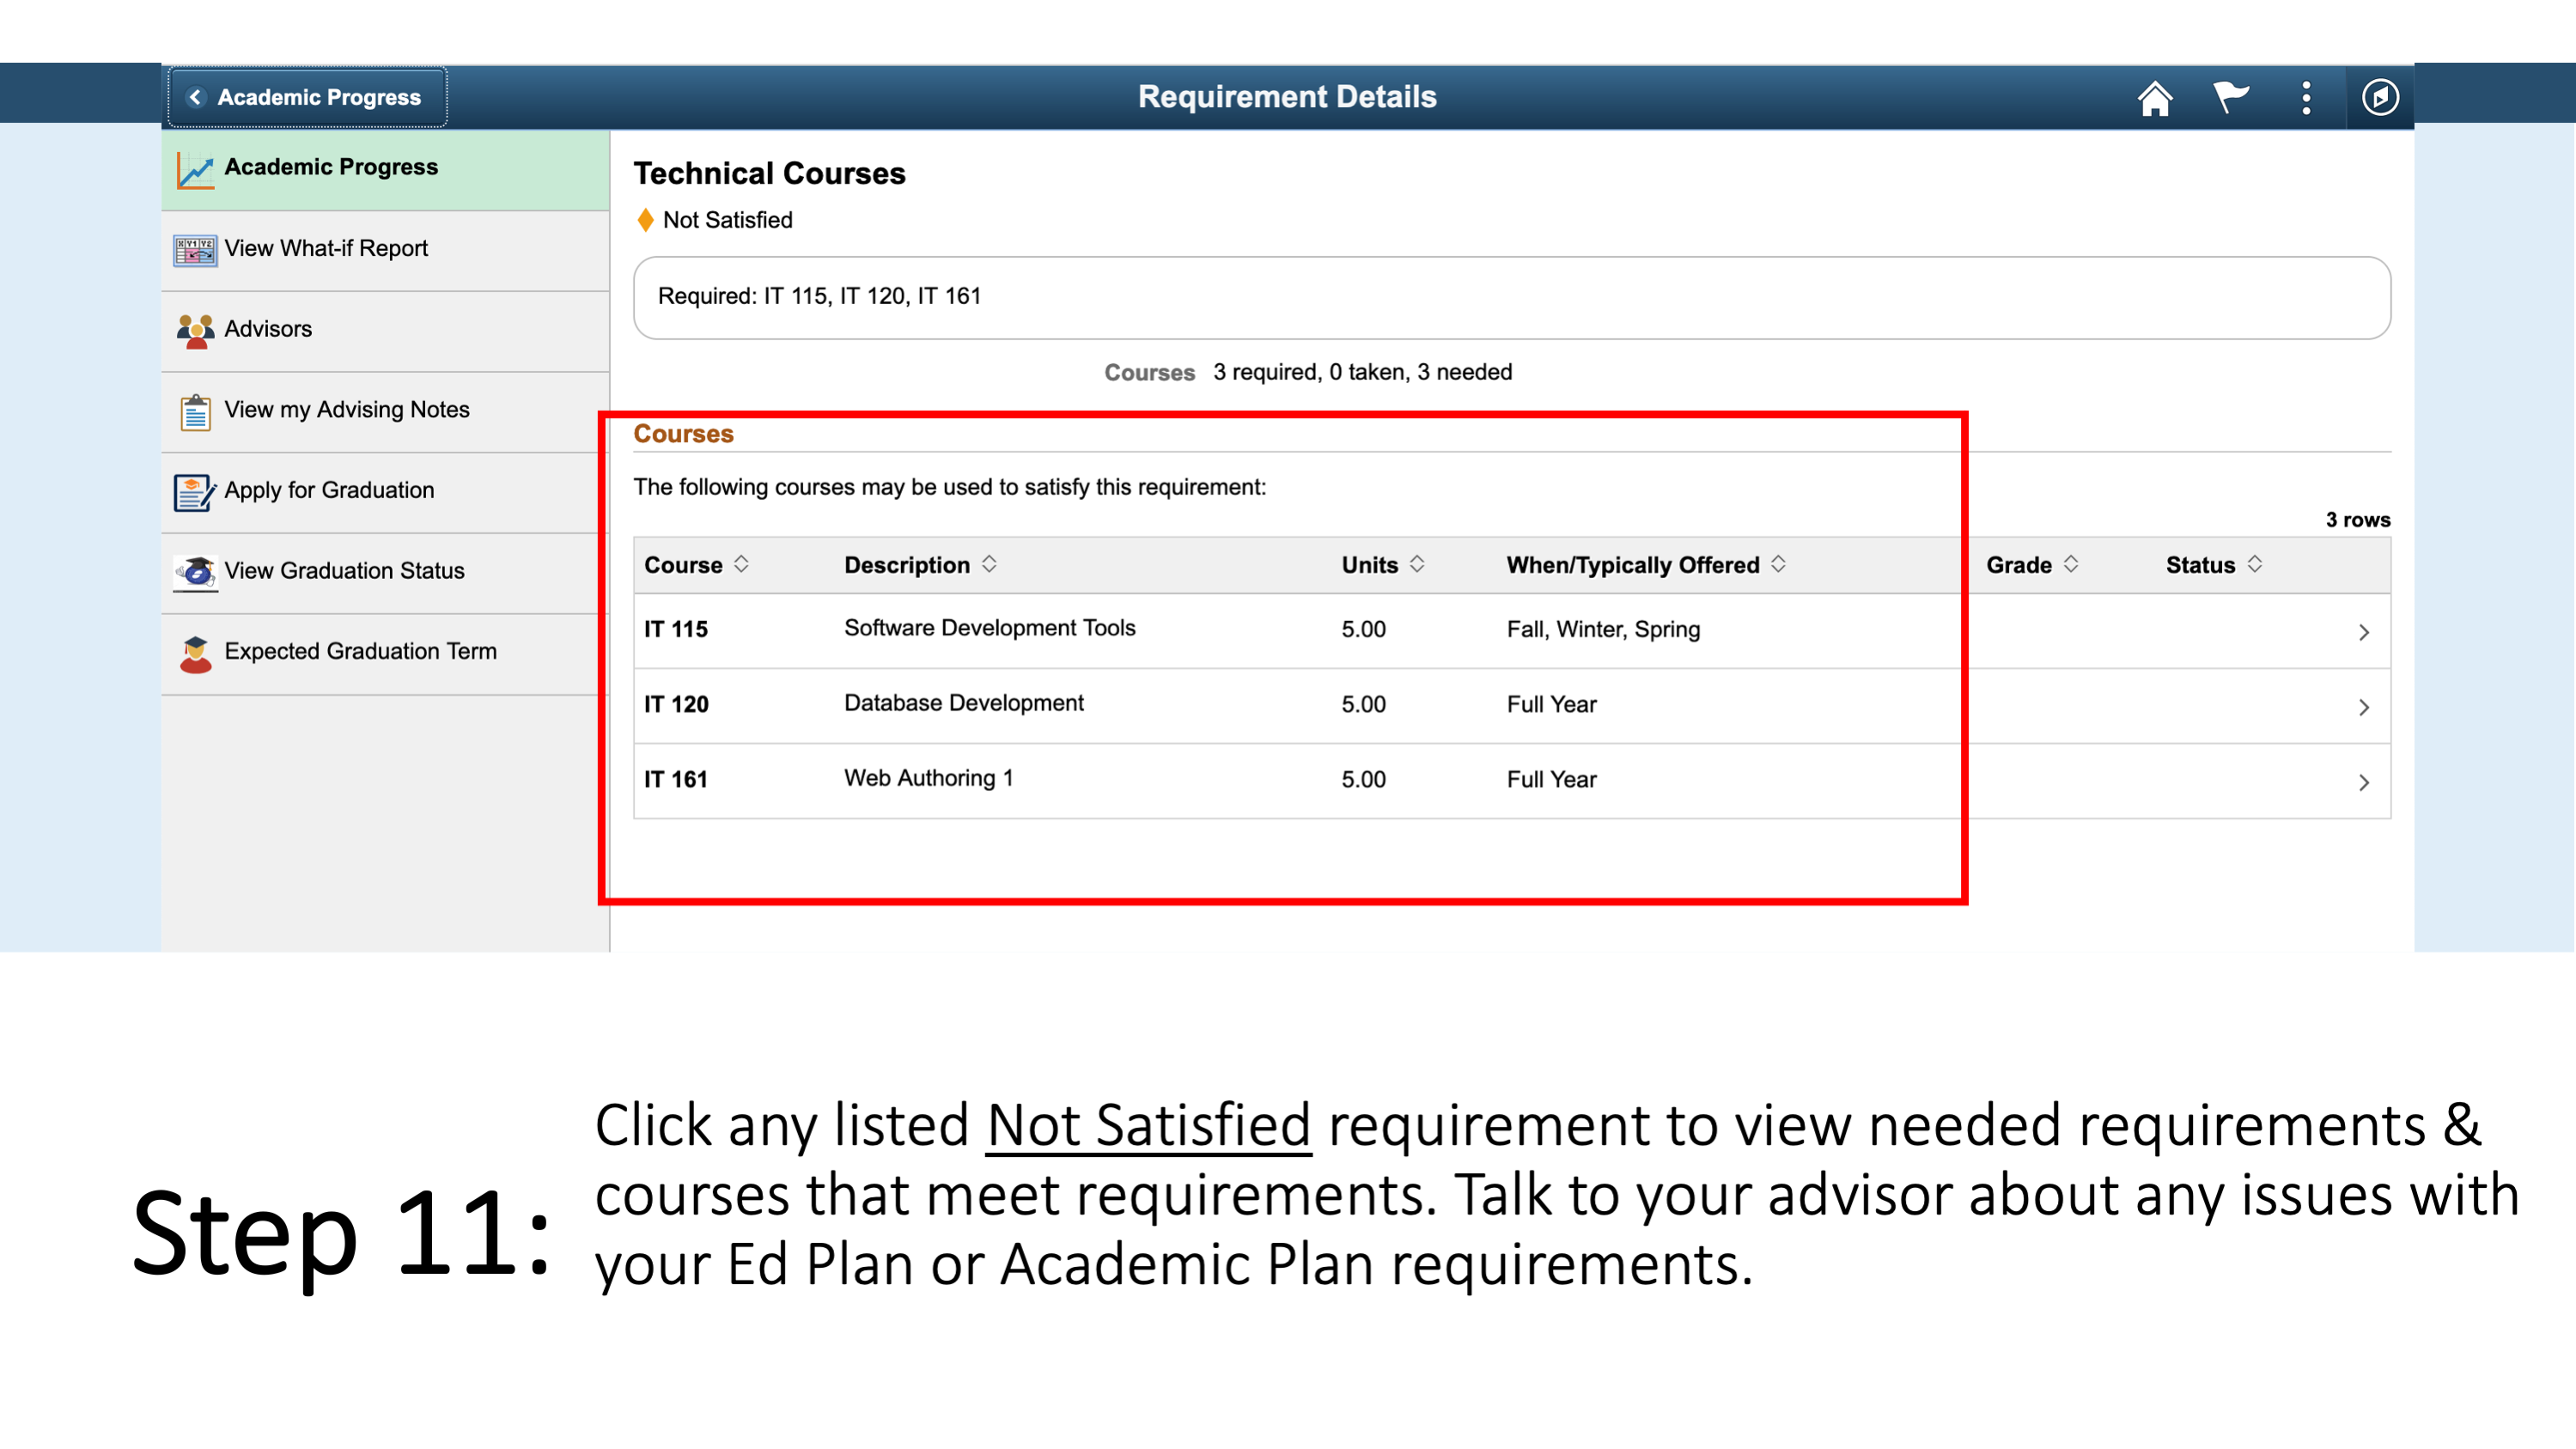 Step 11: Click any listed Not Satisfied requirement to view needed requirements & courses that meet requirements. Talk to your advisor about any issues with your Ed Plan or Academic Plan requirements. 